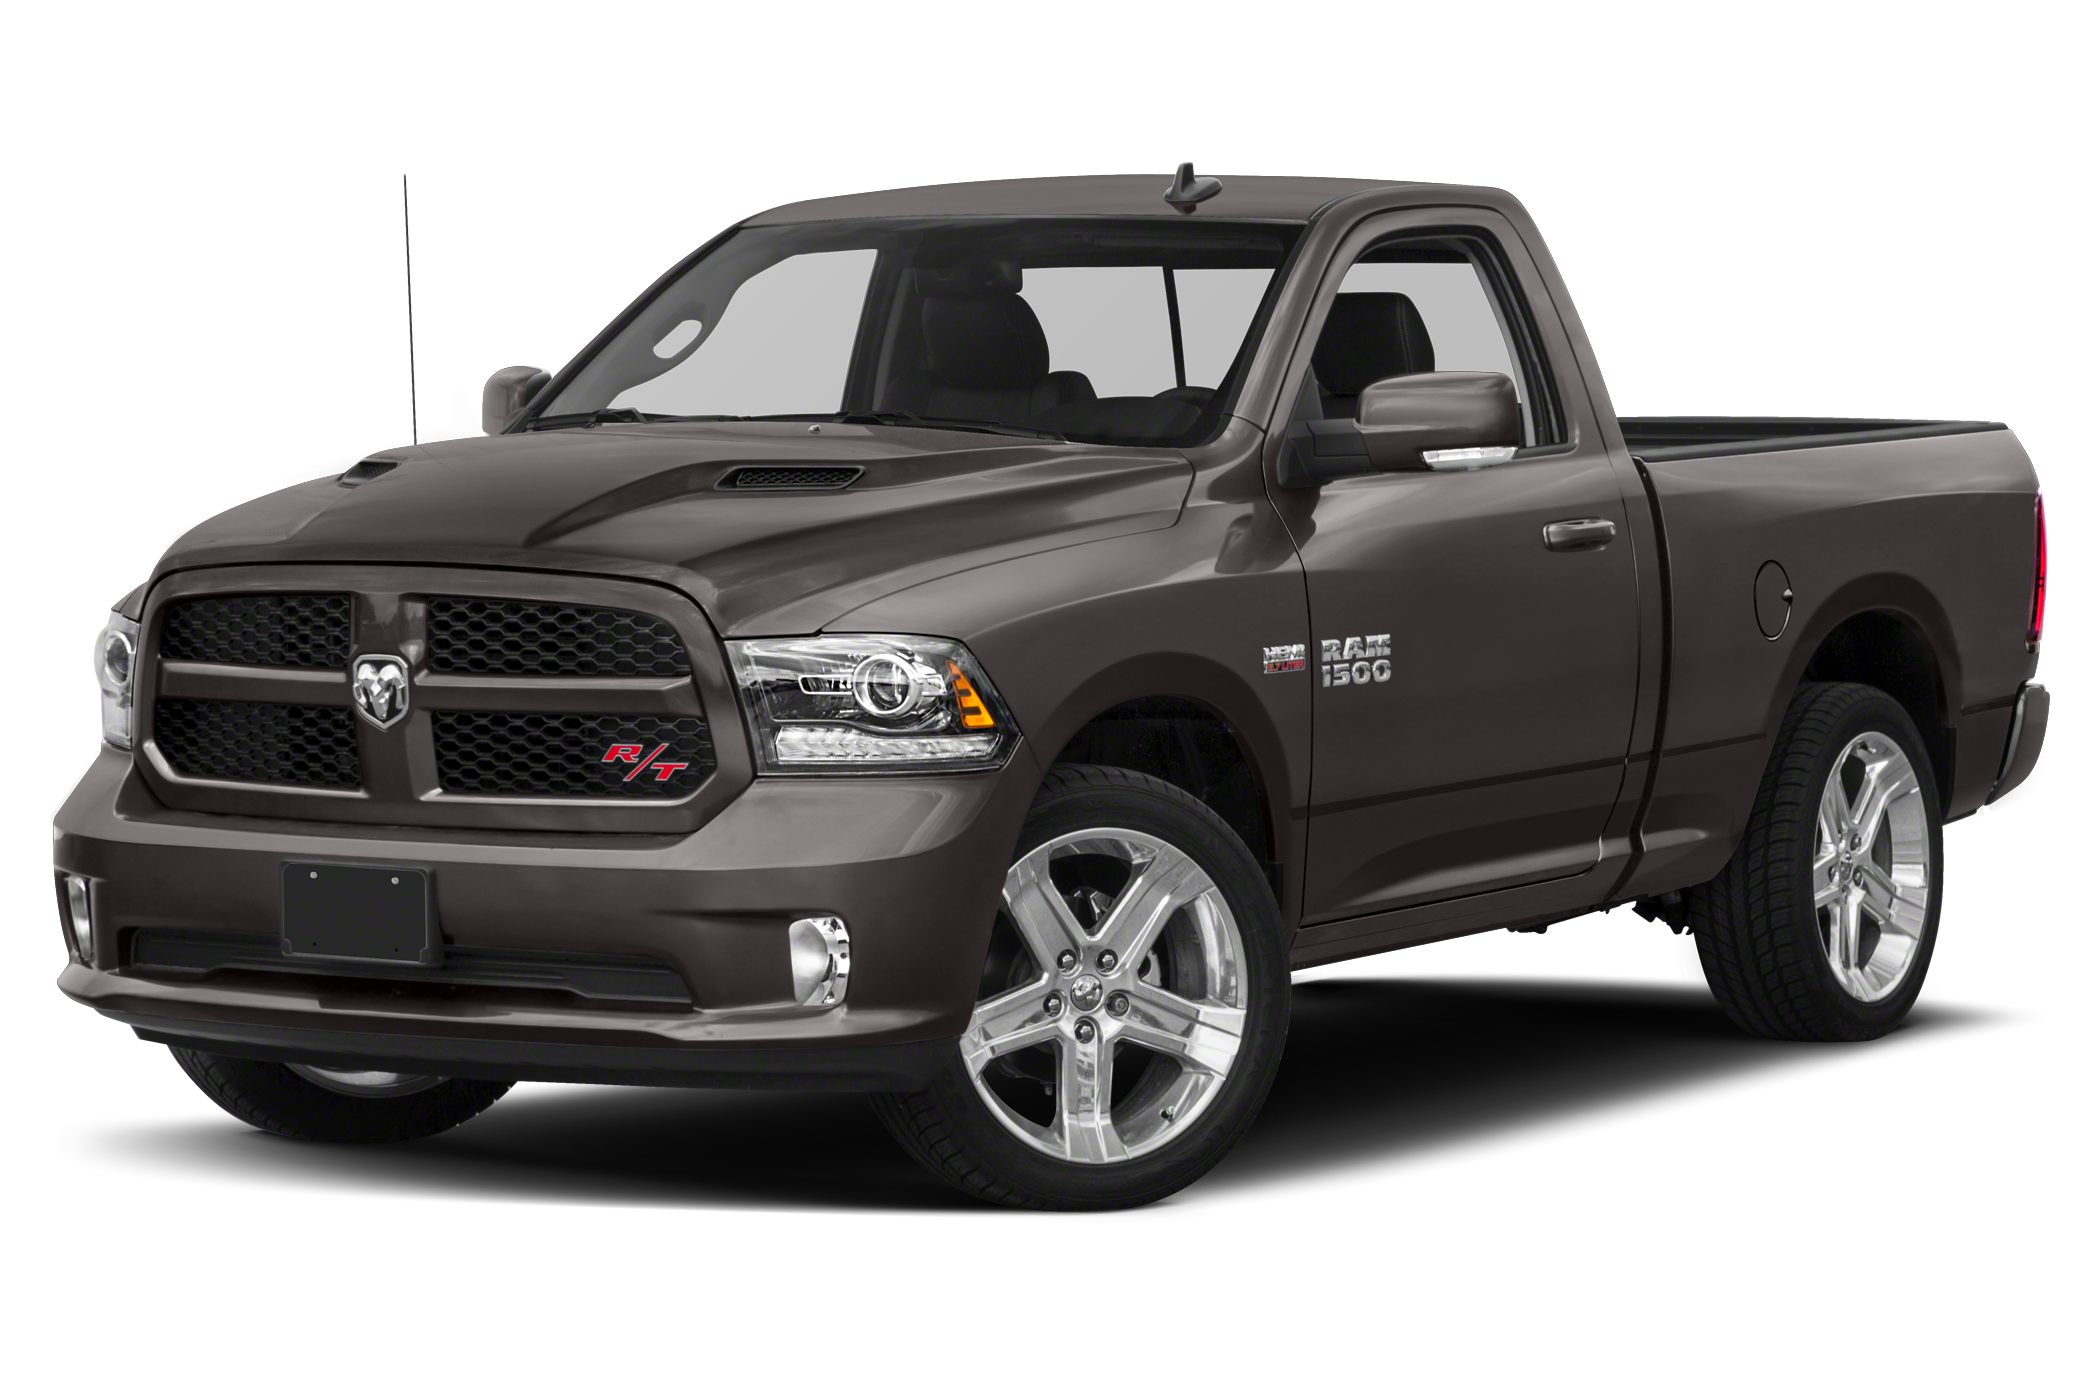 great-deals-on-a-new-2017-ram-1500-sport-4x4-regular-cab-120-in-wb-at